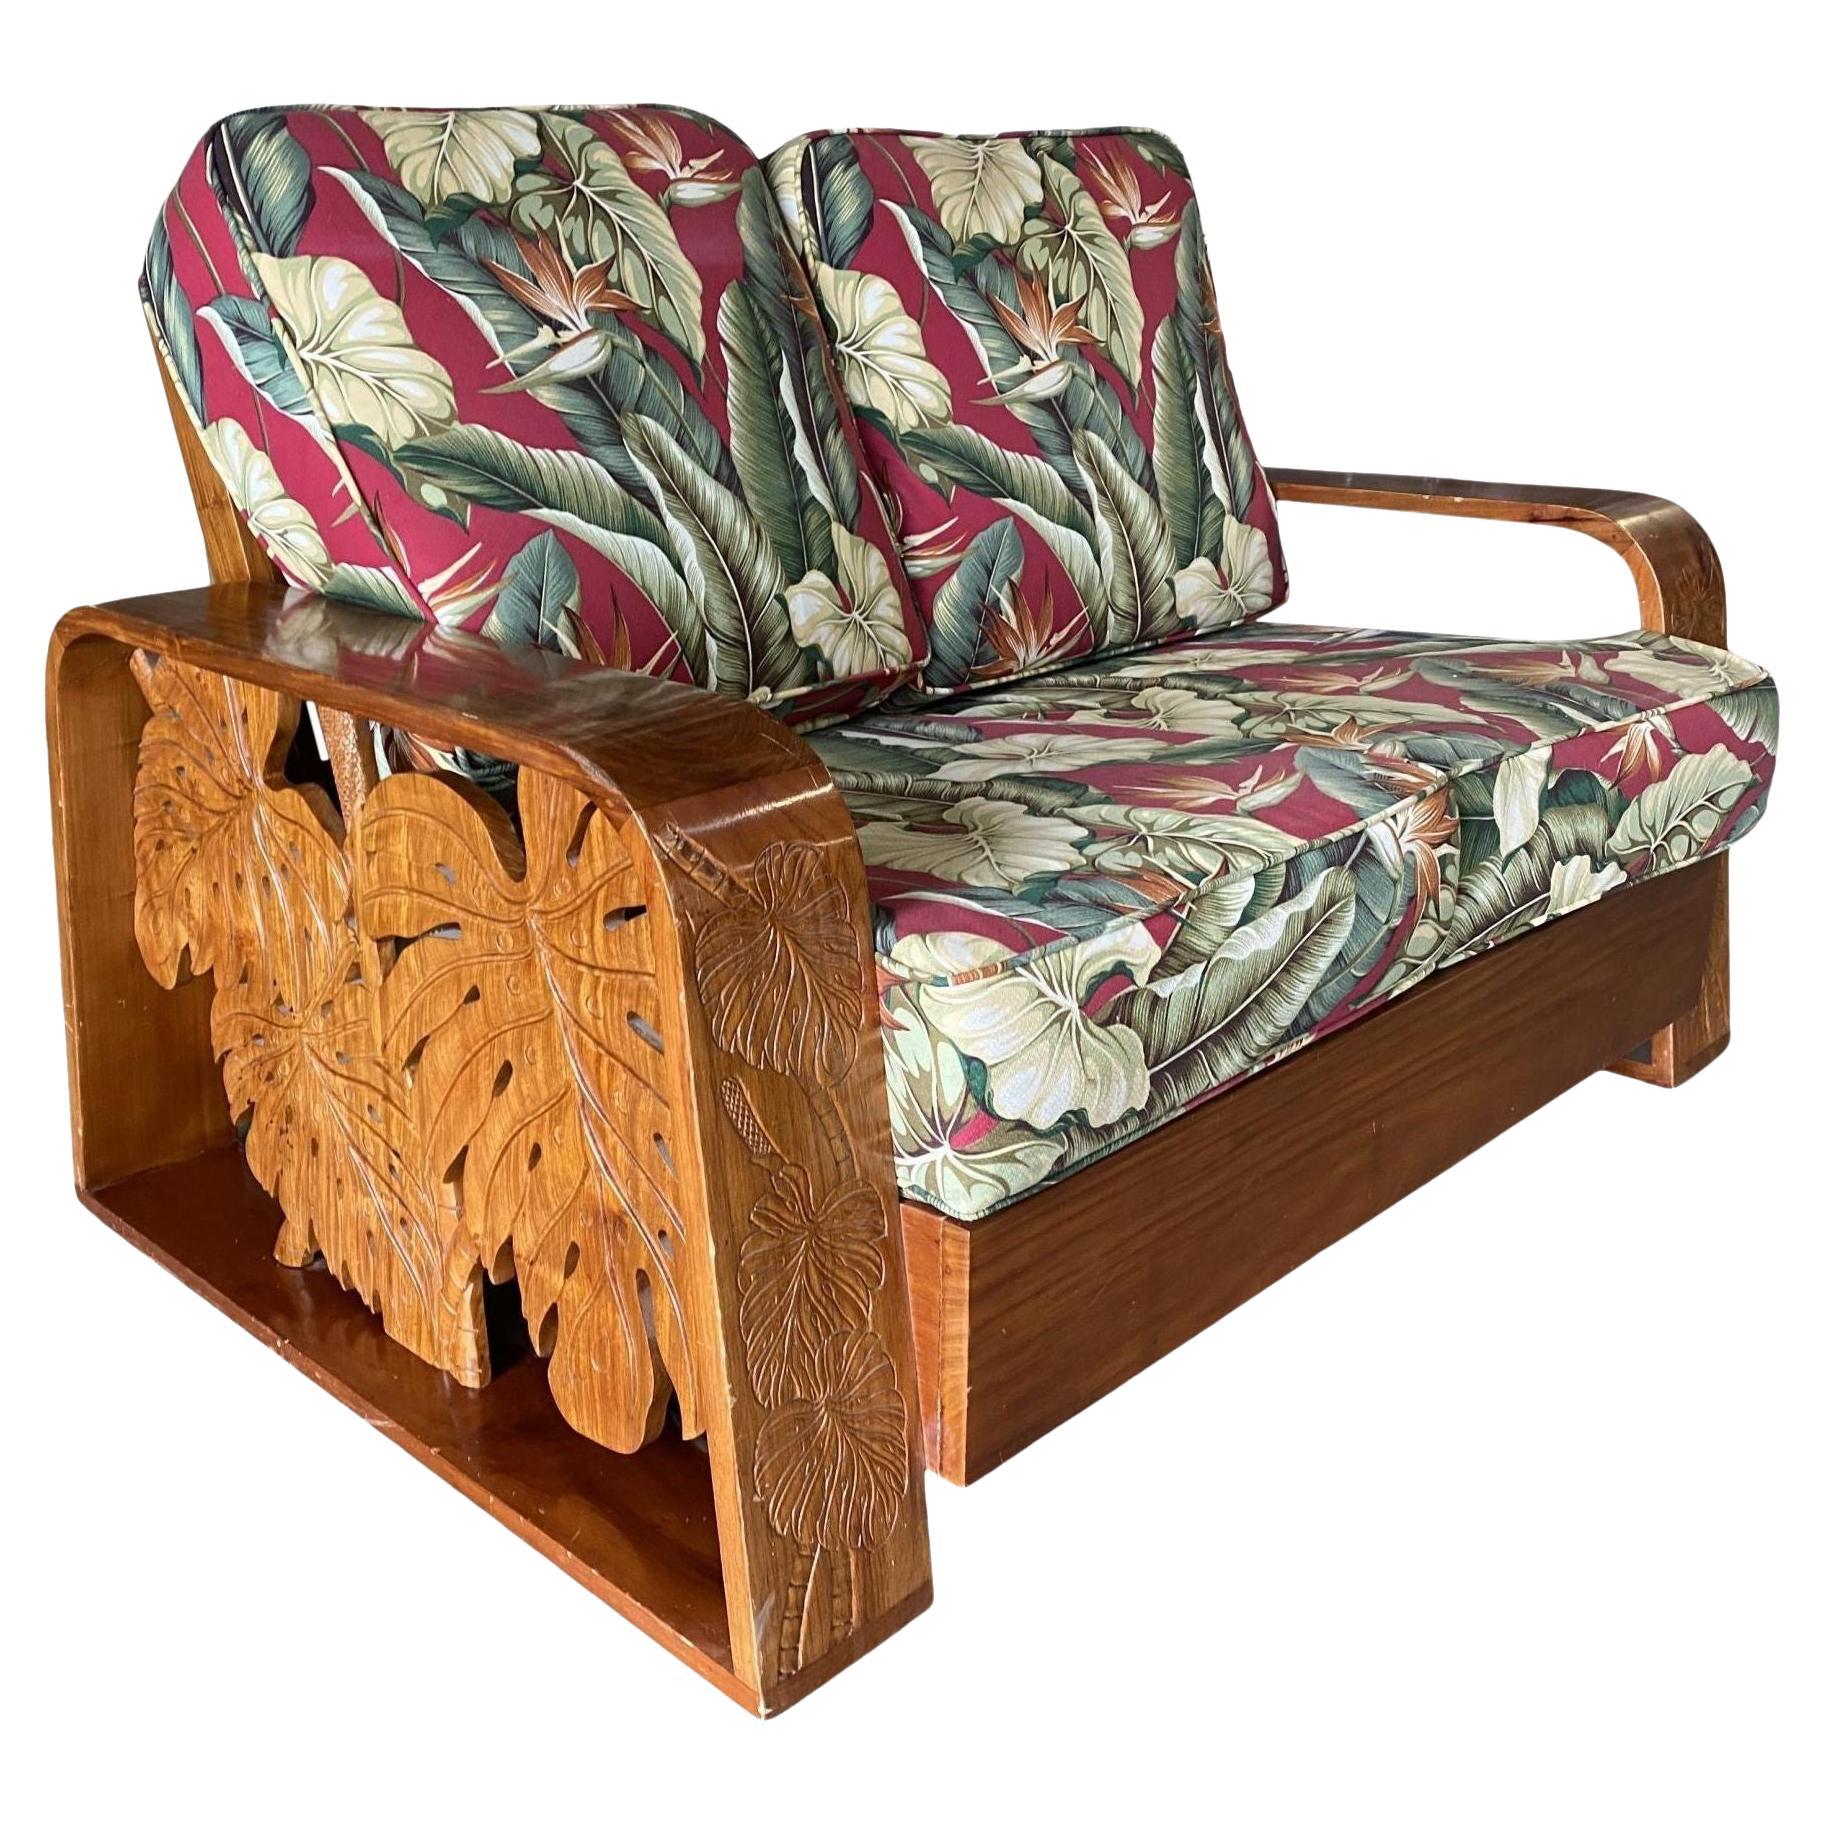 Post War Carved Mango Wood Tropical Mid Century Loveseat Sofa For Sale